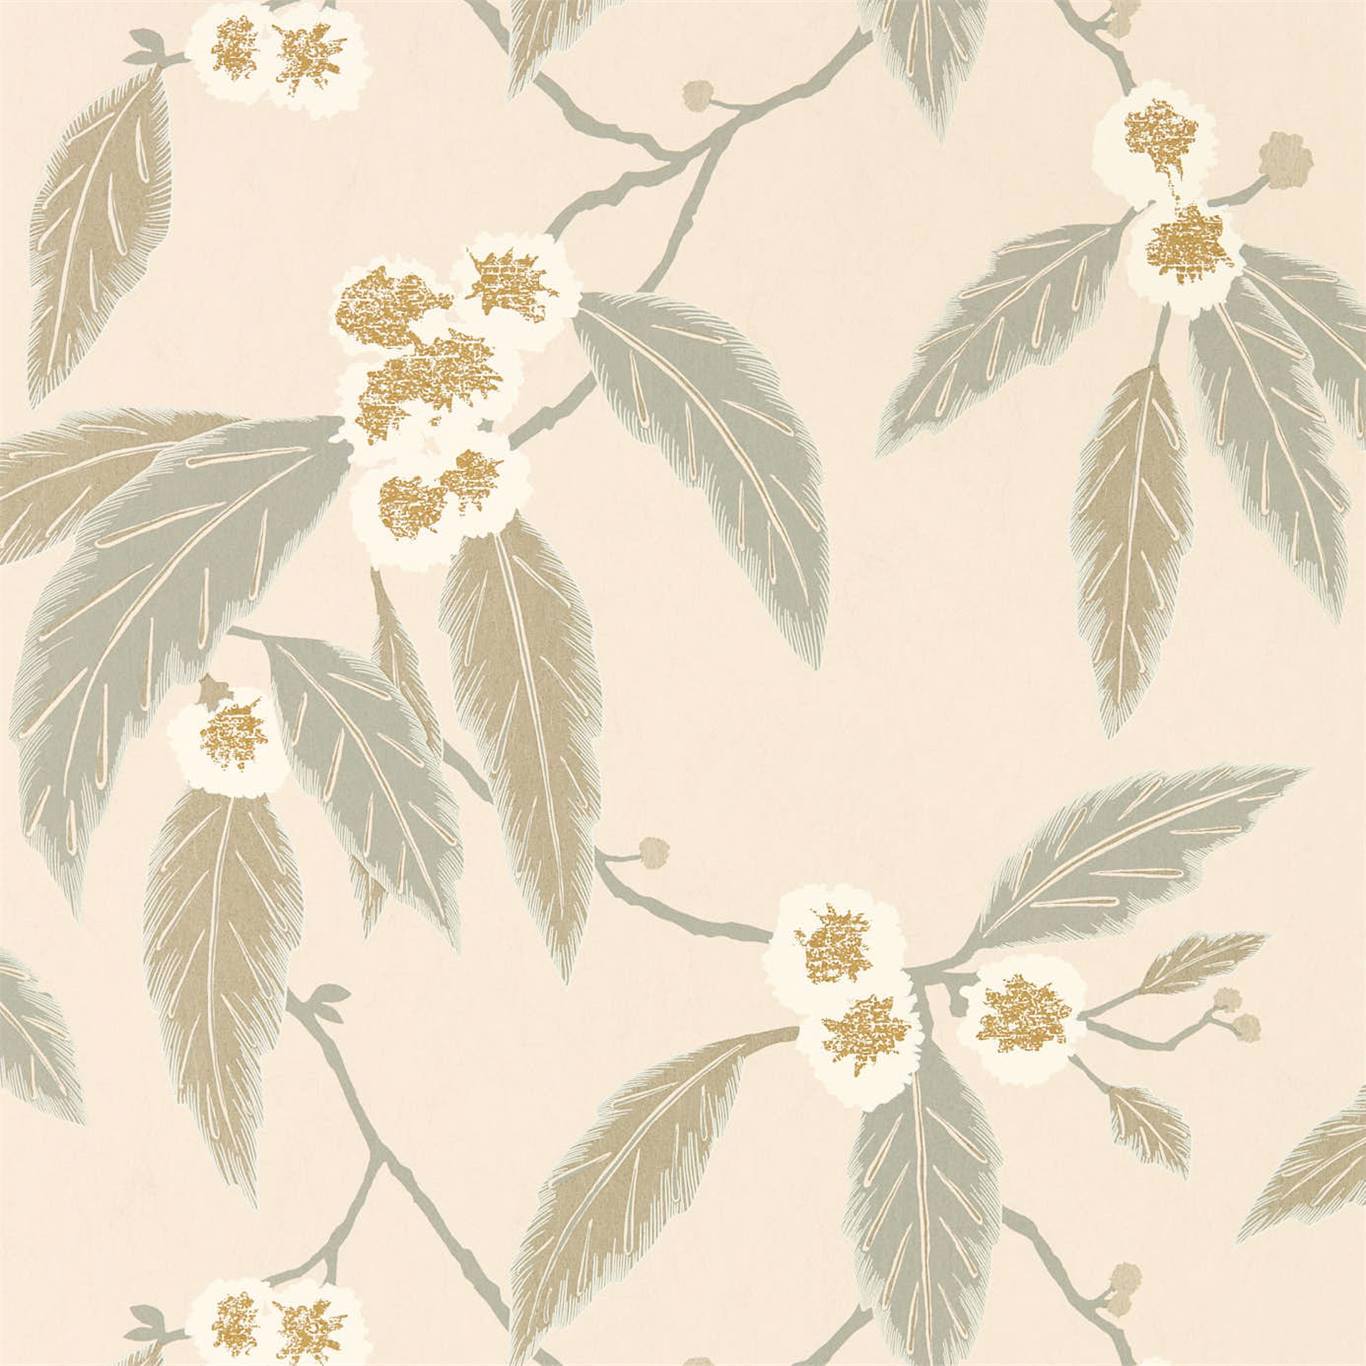 Coppice Powder / Truffle / Gilver Wallpaper HSAW112135 by Harlequin